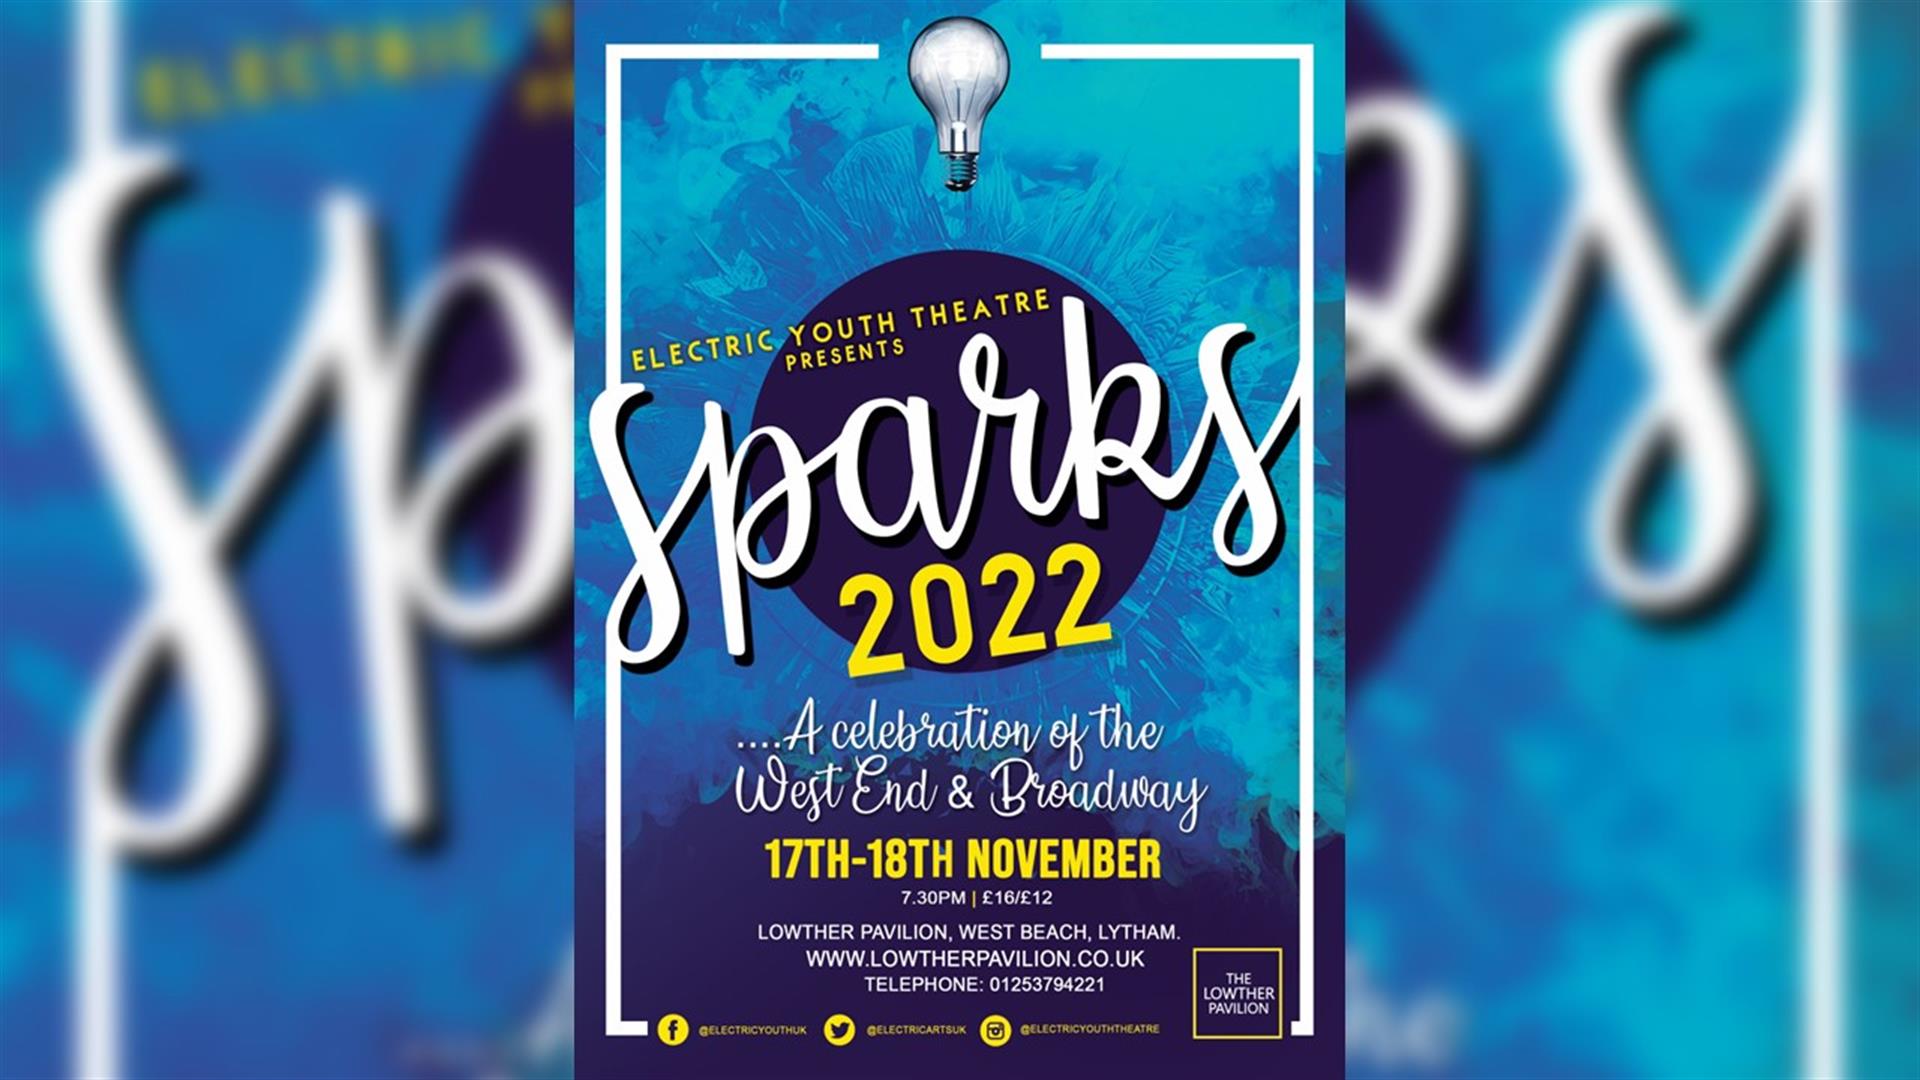 Sparks 2022 – A Celebration Of The West End And Broadway - Lowther Pavilion